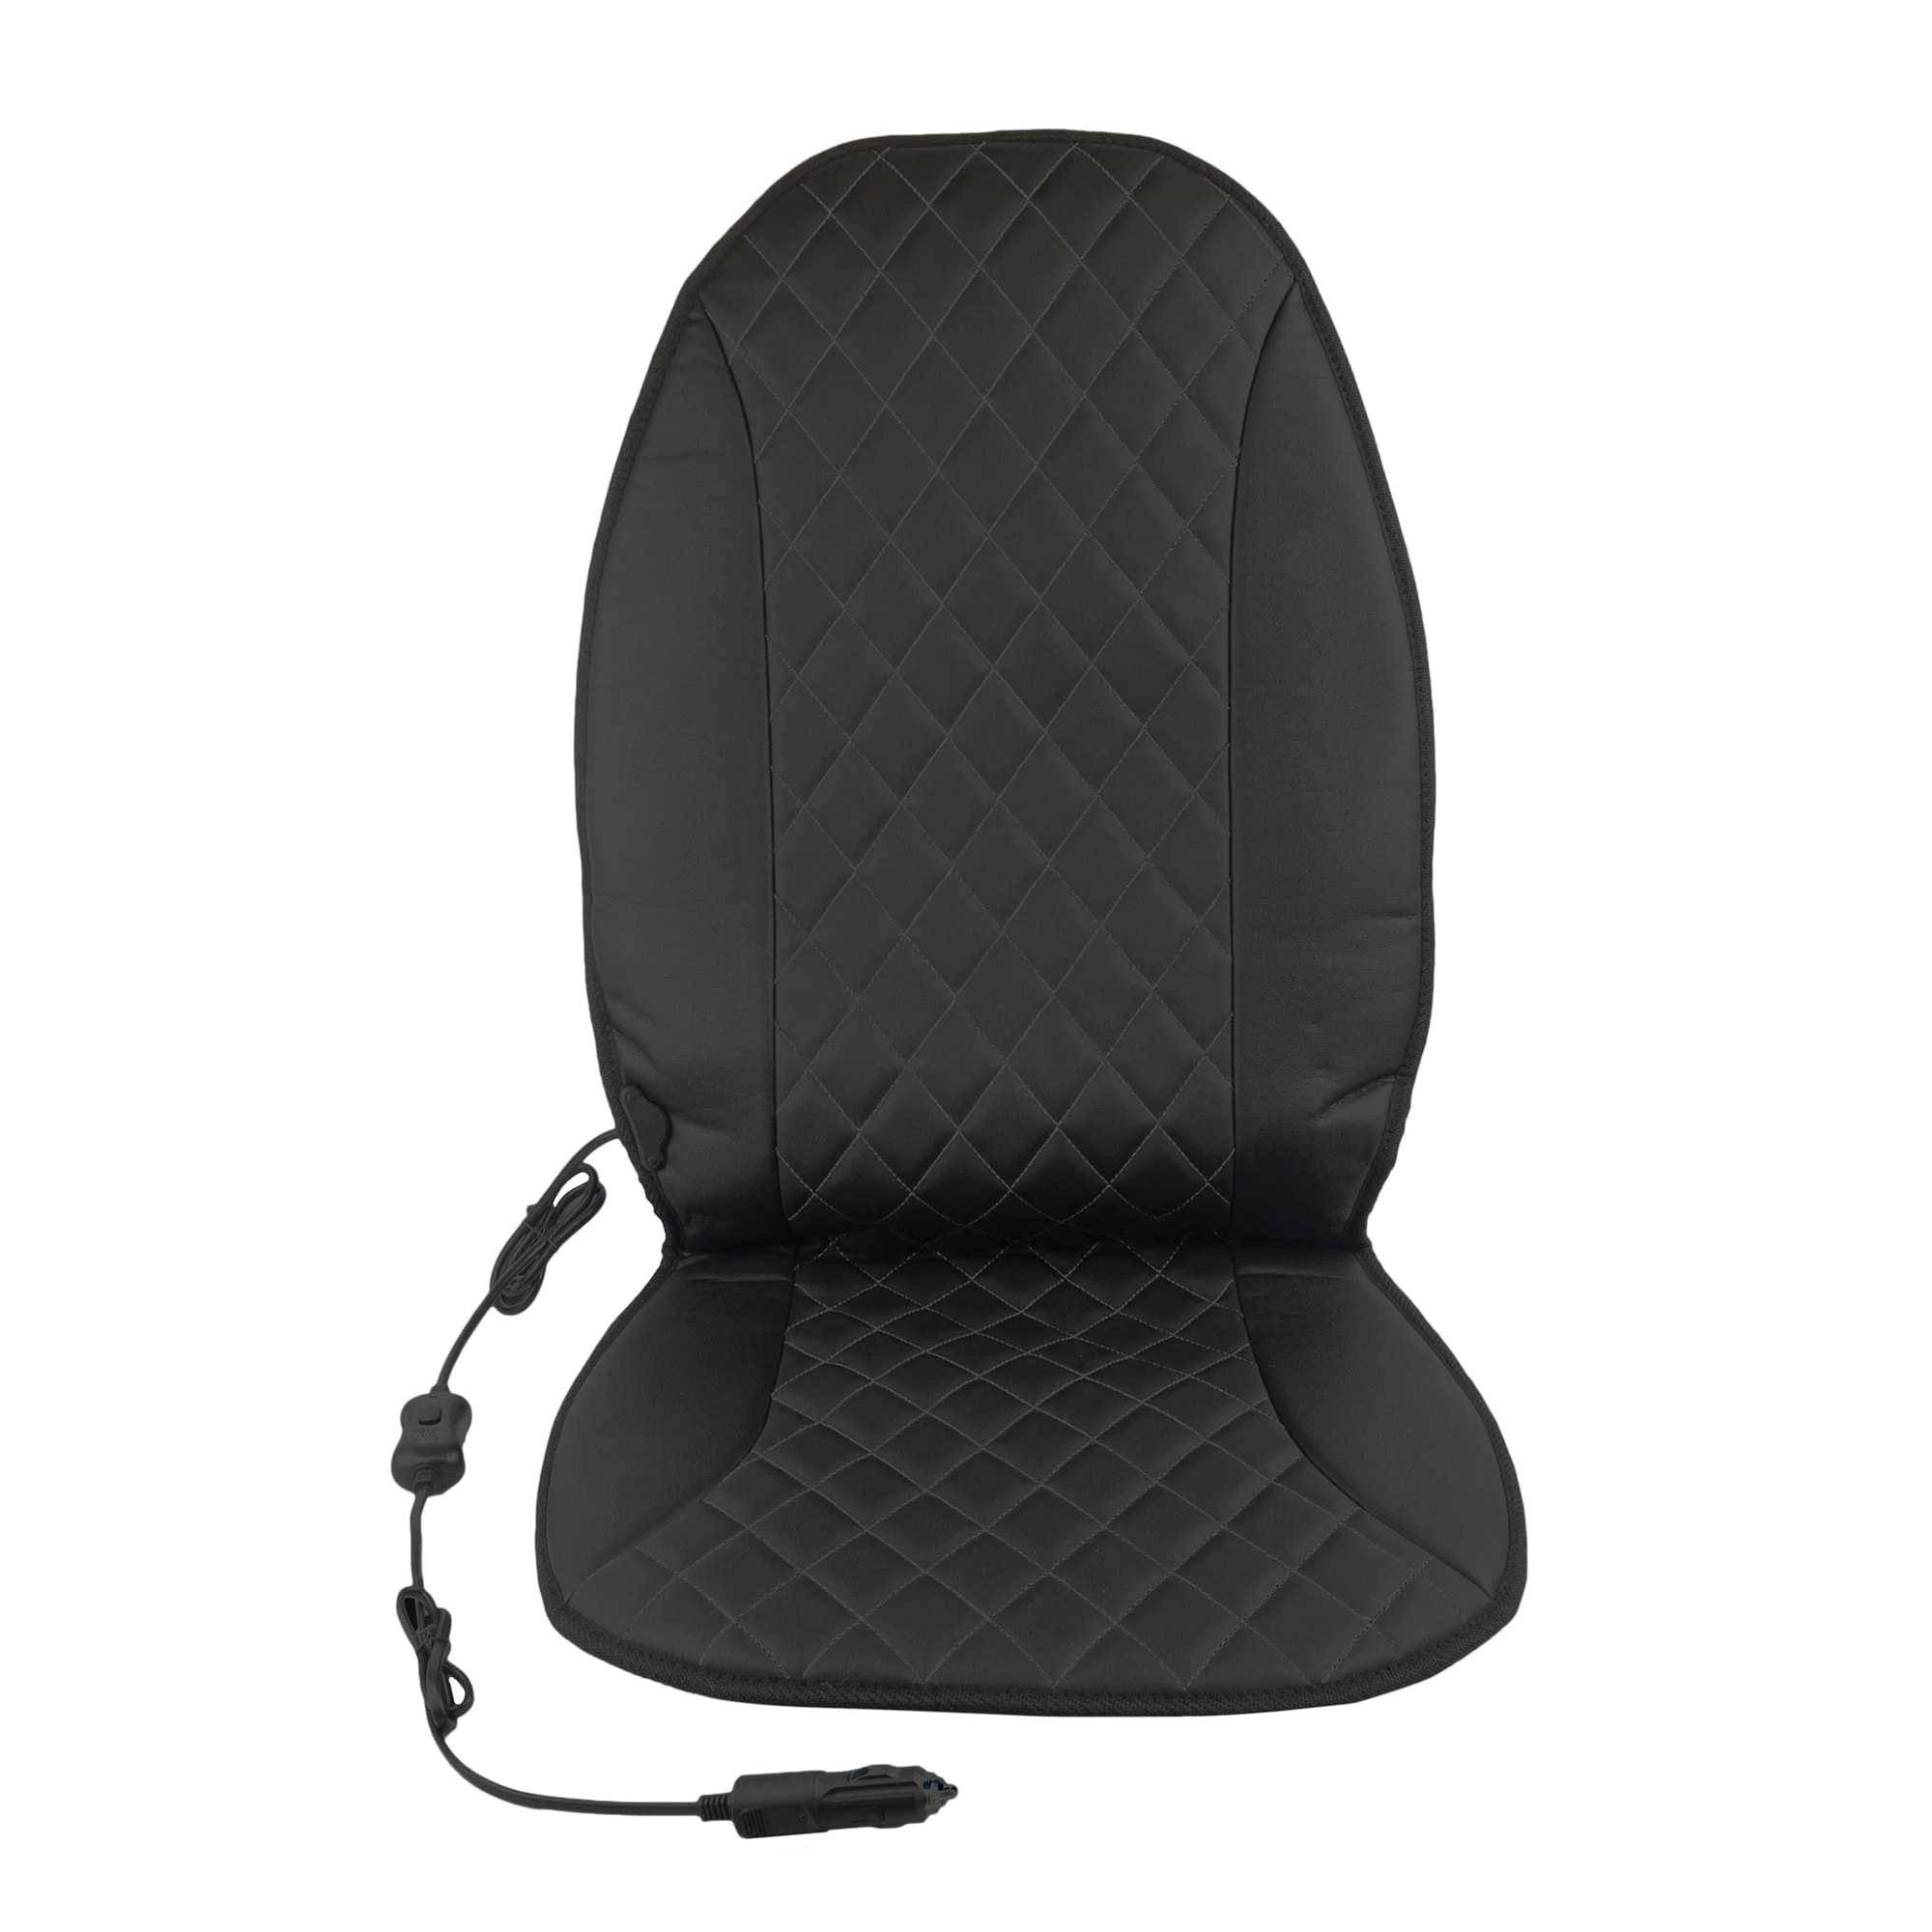 HealthMate Black Polyester Car Seat Cushion - 12-Volt Heated Cushion for Car  - Even Heating, Flexible Element for Comfort and Durability in the Interior  Car Accessories department at